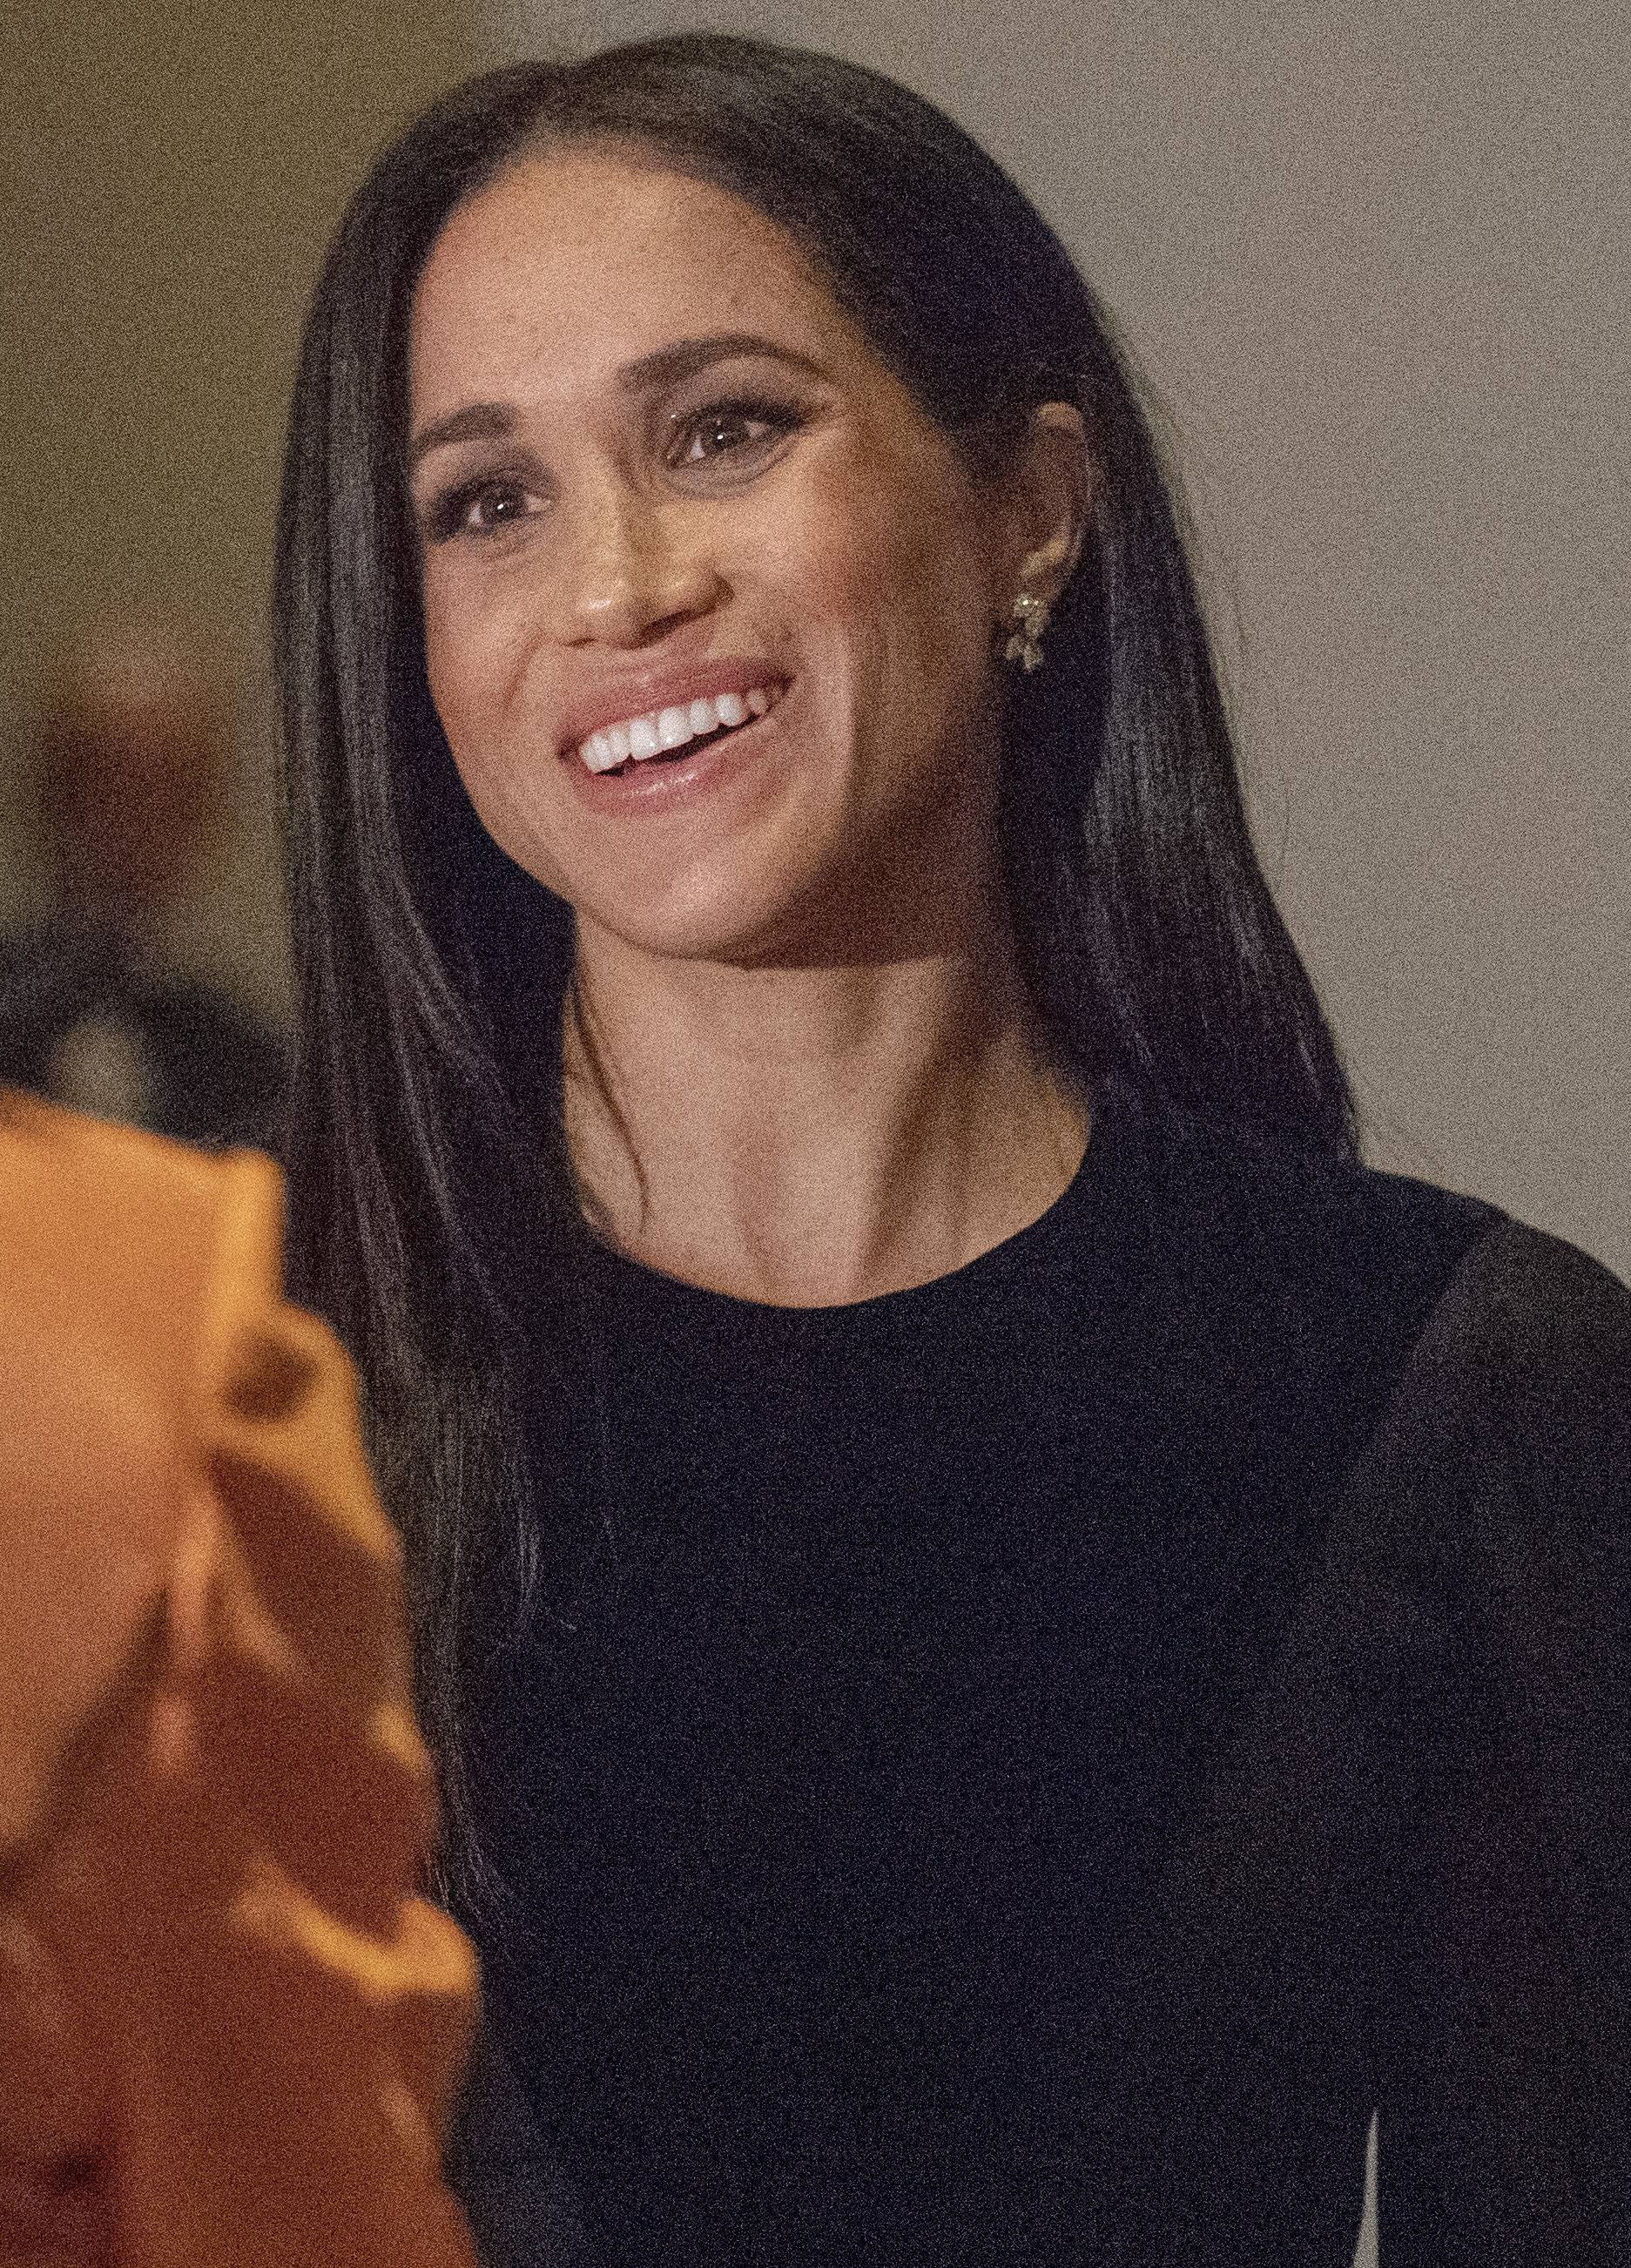 Duchess of Sussex visit to the Royal Academy of Arts